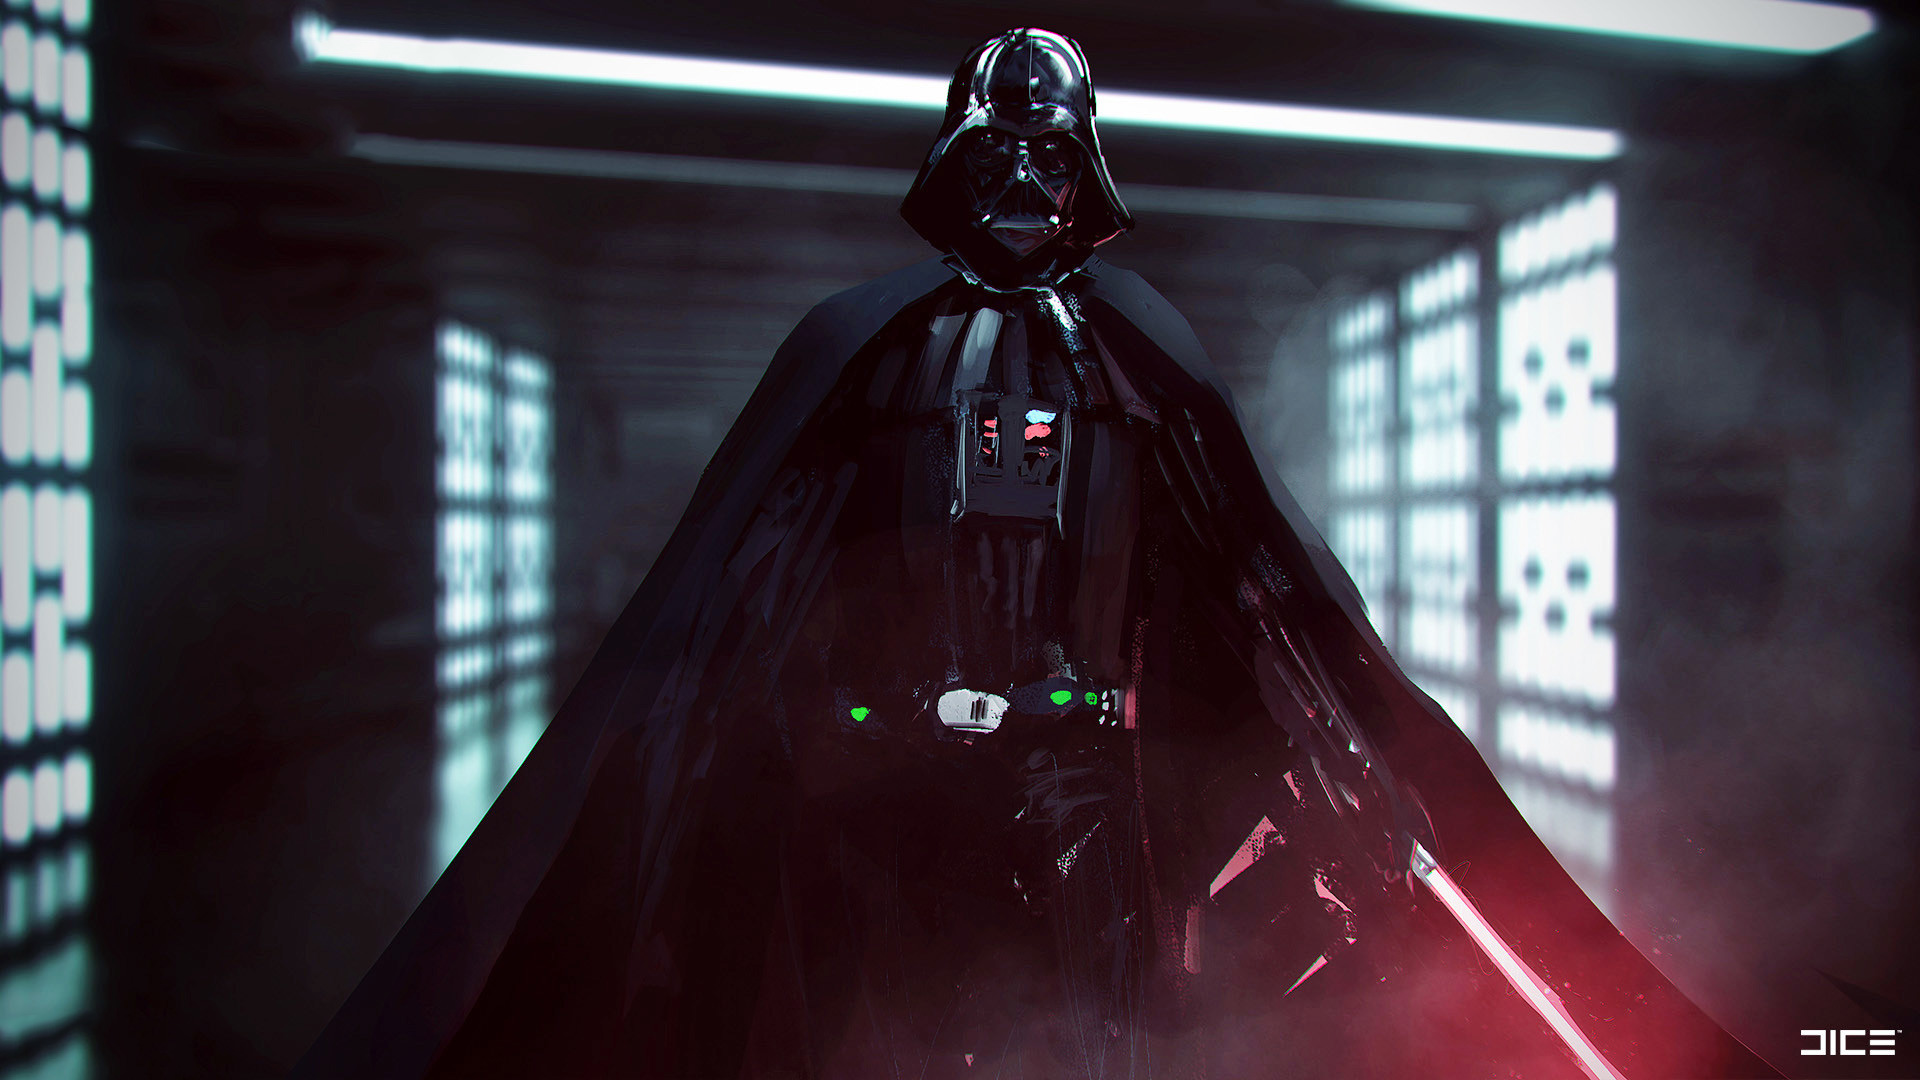 Darth Vader Star Wars Battlefront 2 Concept Art Hd Games 4k Wallpapers Images Backgrounds Photos And Pictures